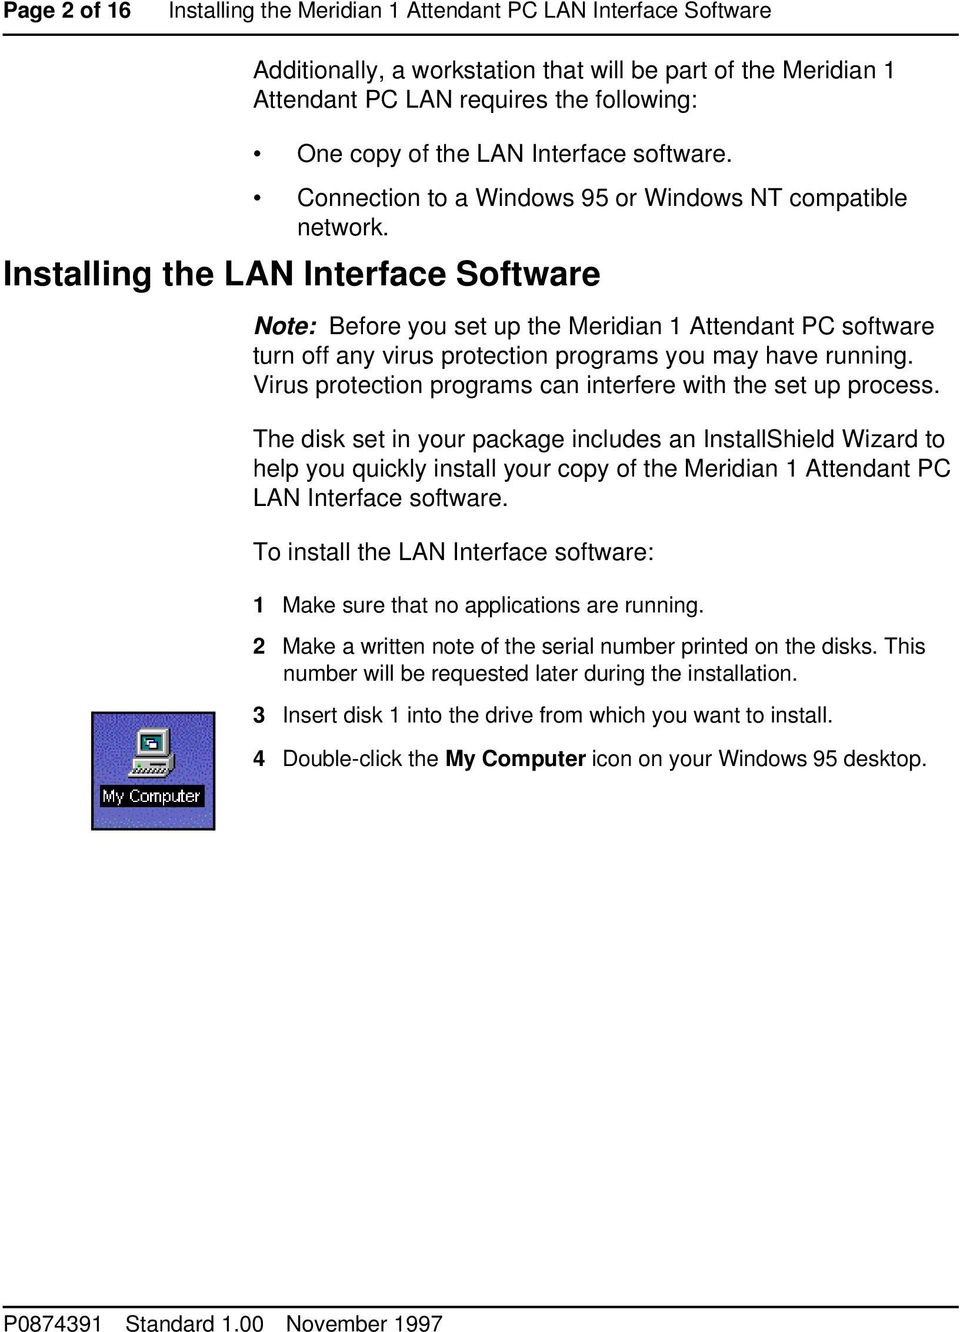 Installing the LAN Interface Software Note: Before you set up the Meridian 1 Attendant PC software turn off any virus protection programs you may have running.